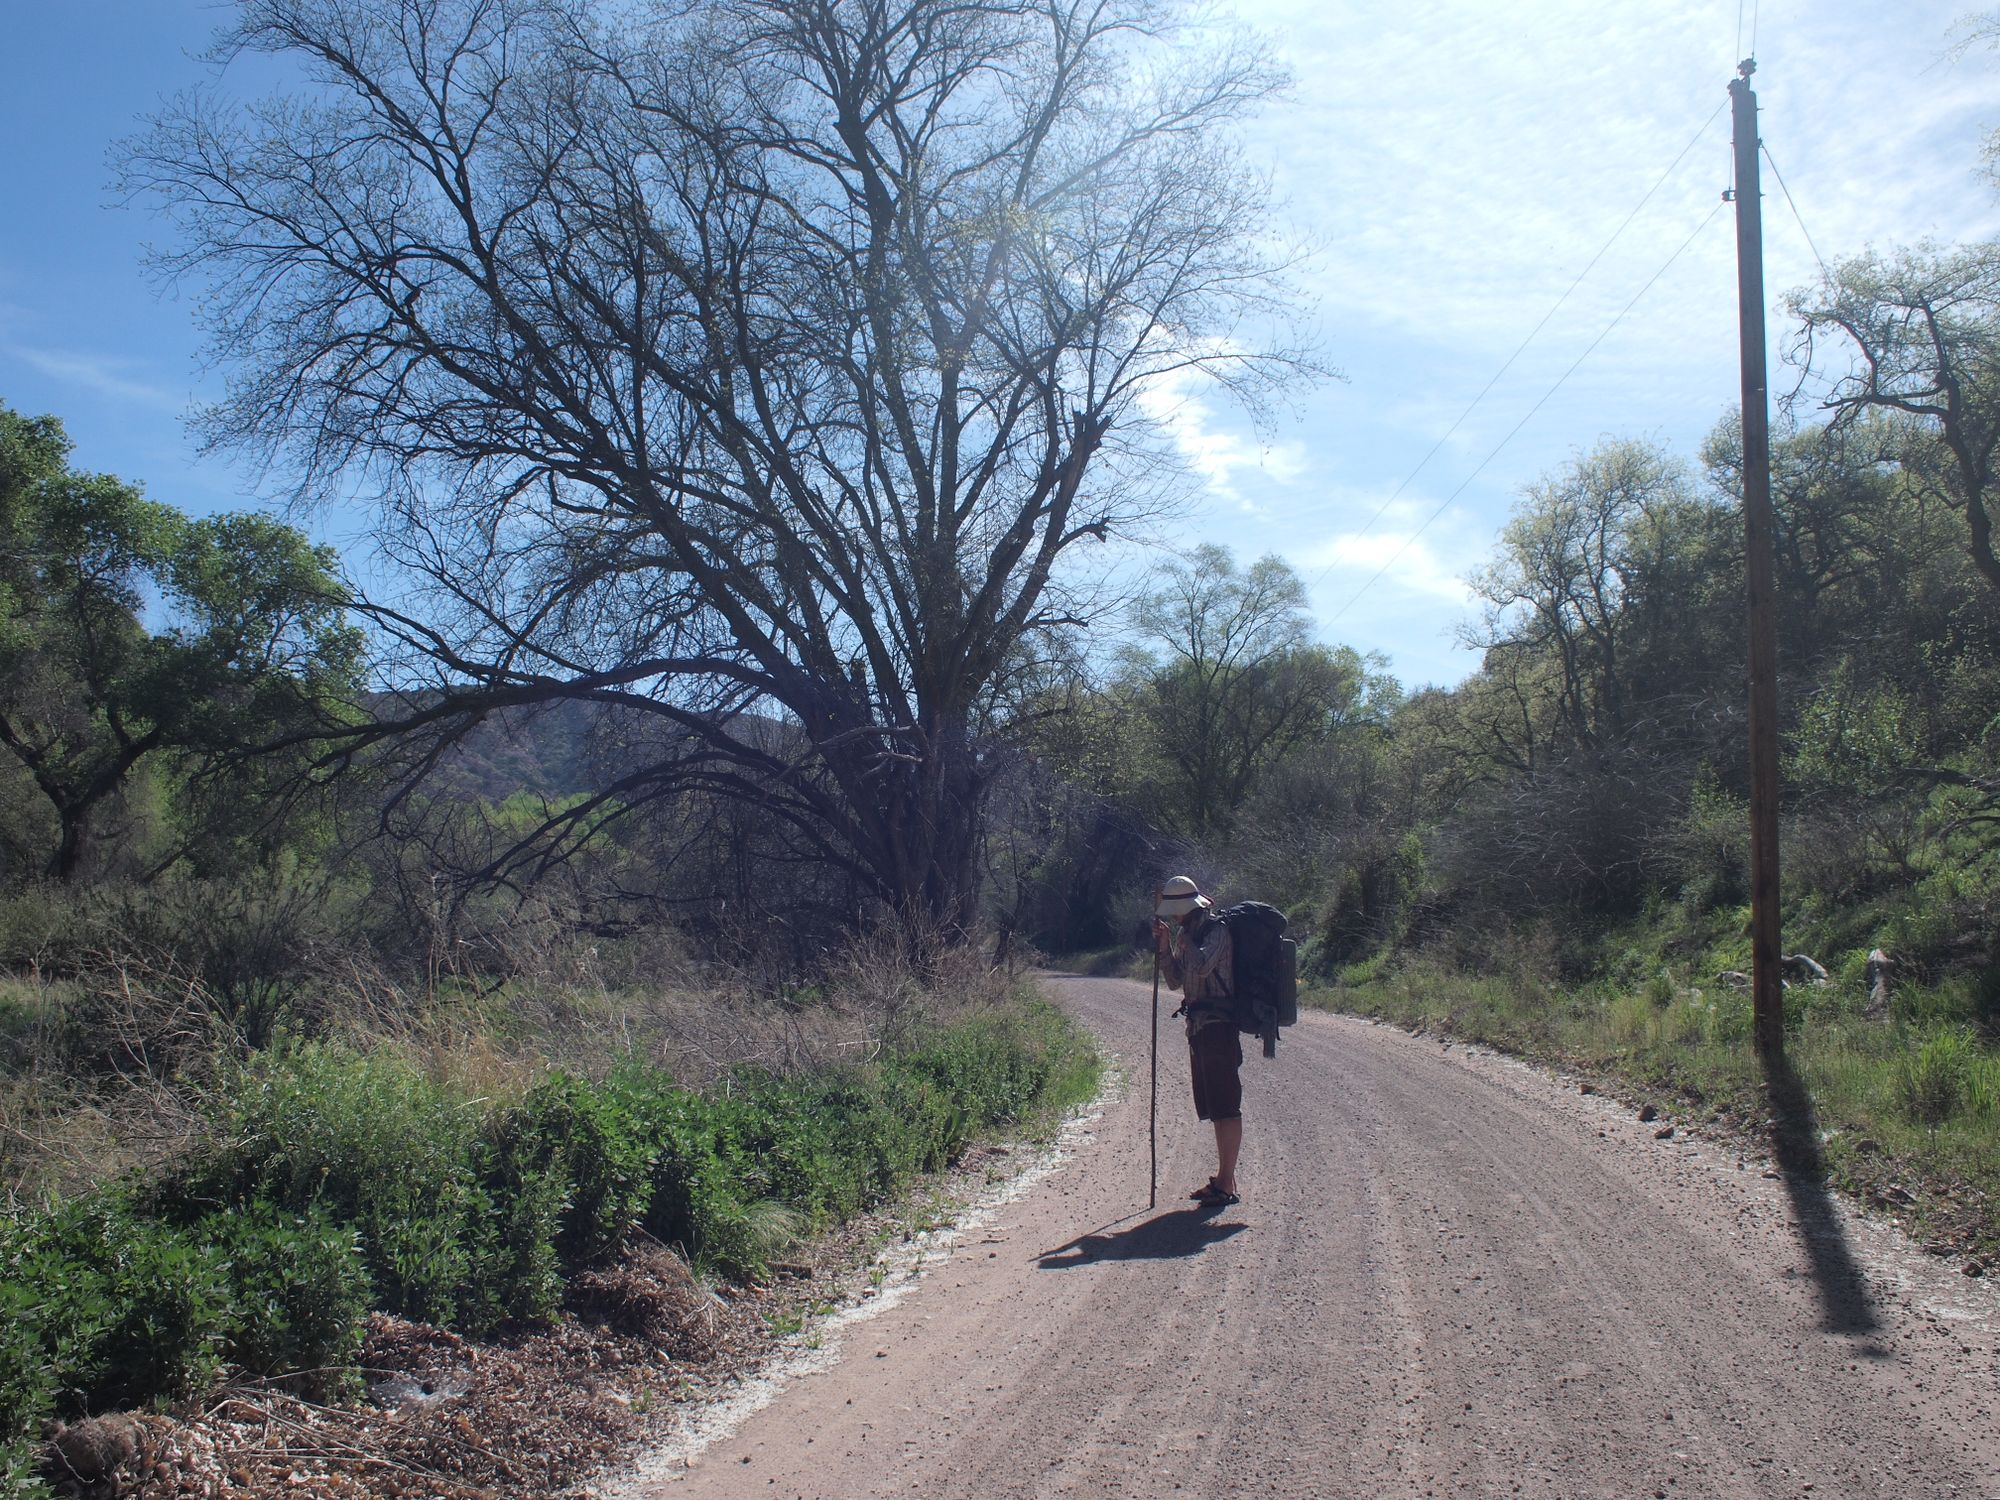 A man with a walking stick and wearing a large backpack stands in the middle of a dirt road, lined by greenery and trees